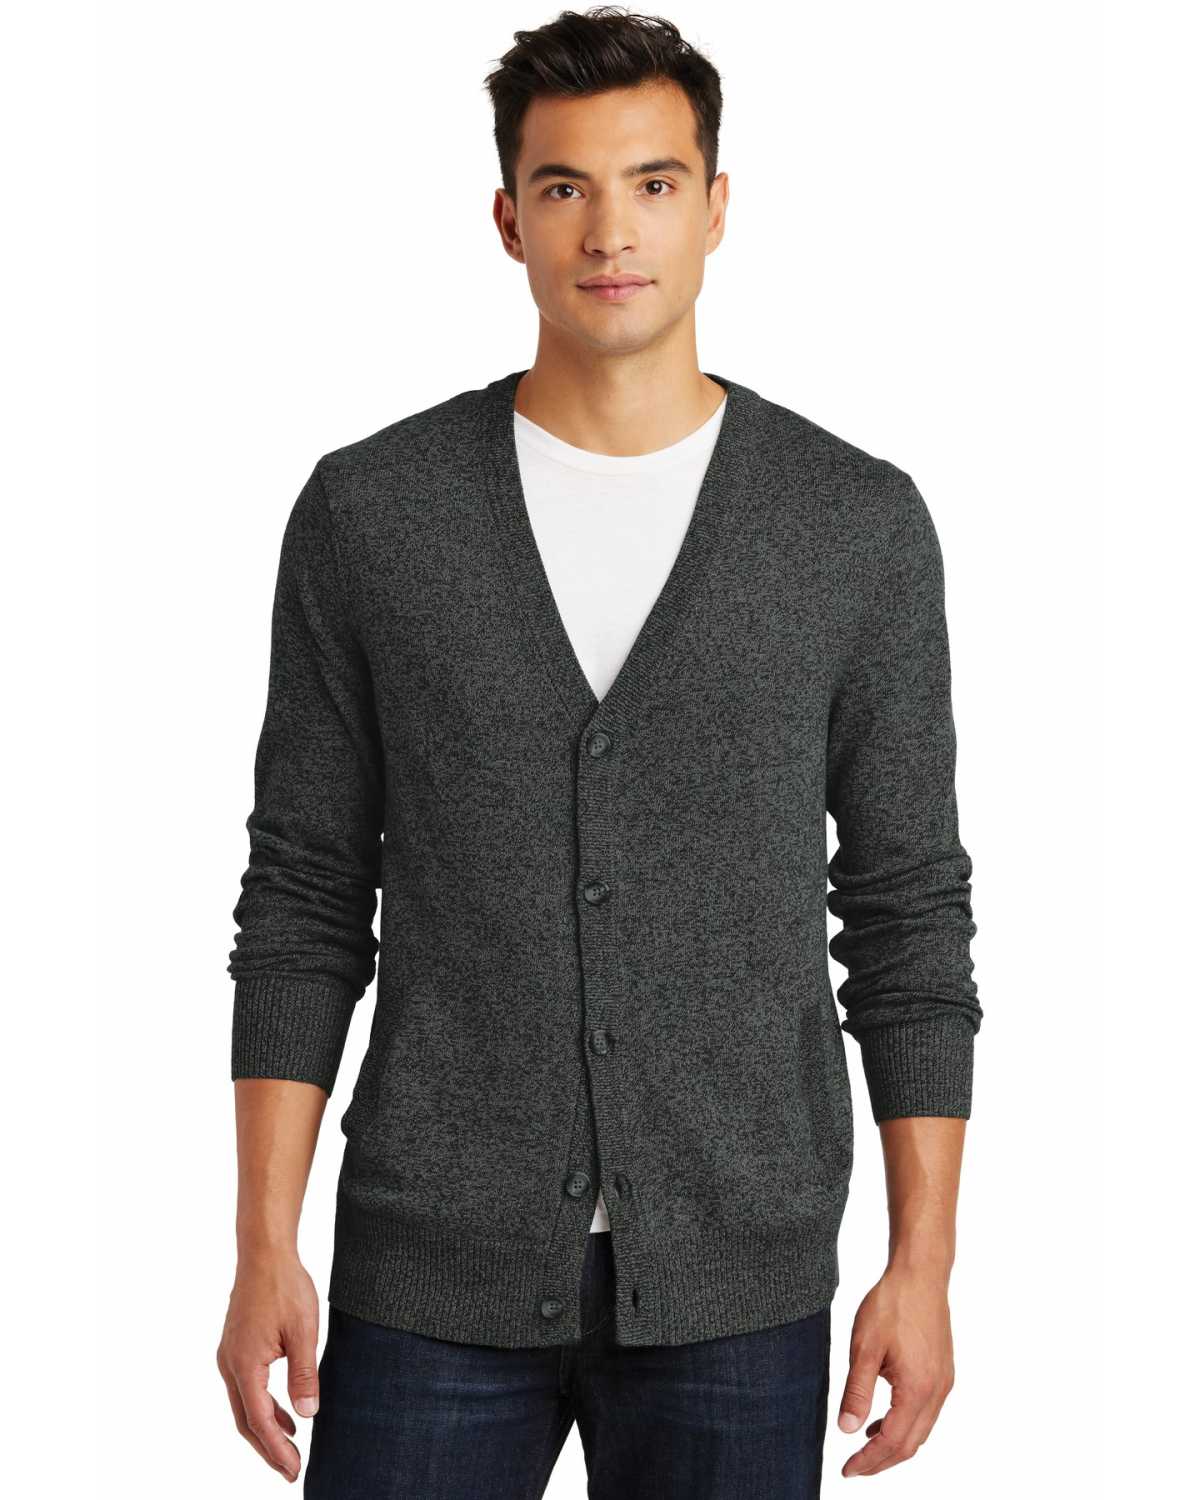 District Made Made DM315 Made Mens Cardigan Sweater on discount ...